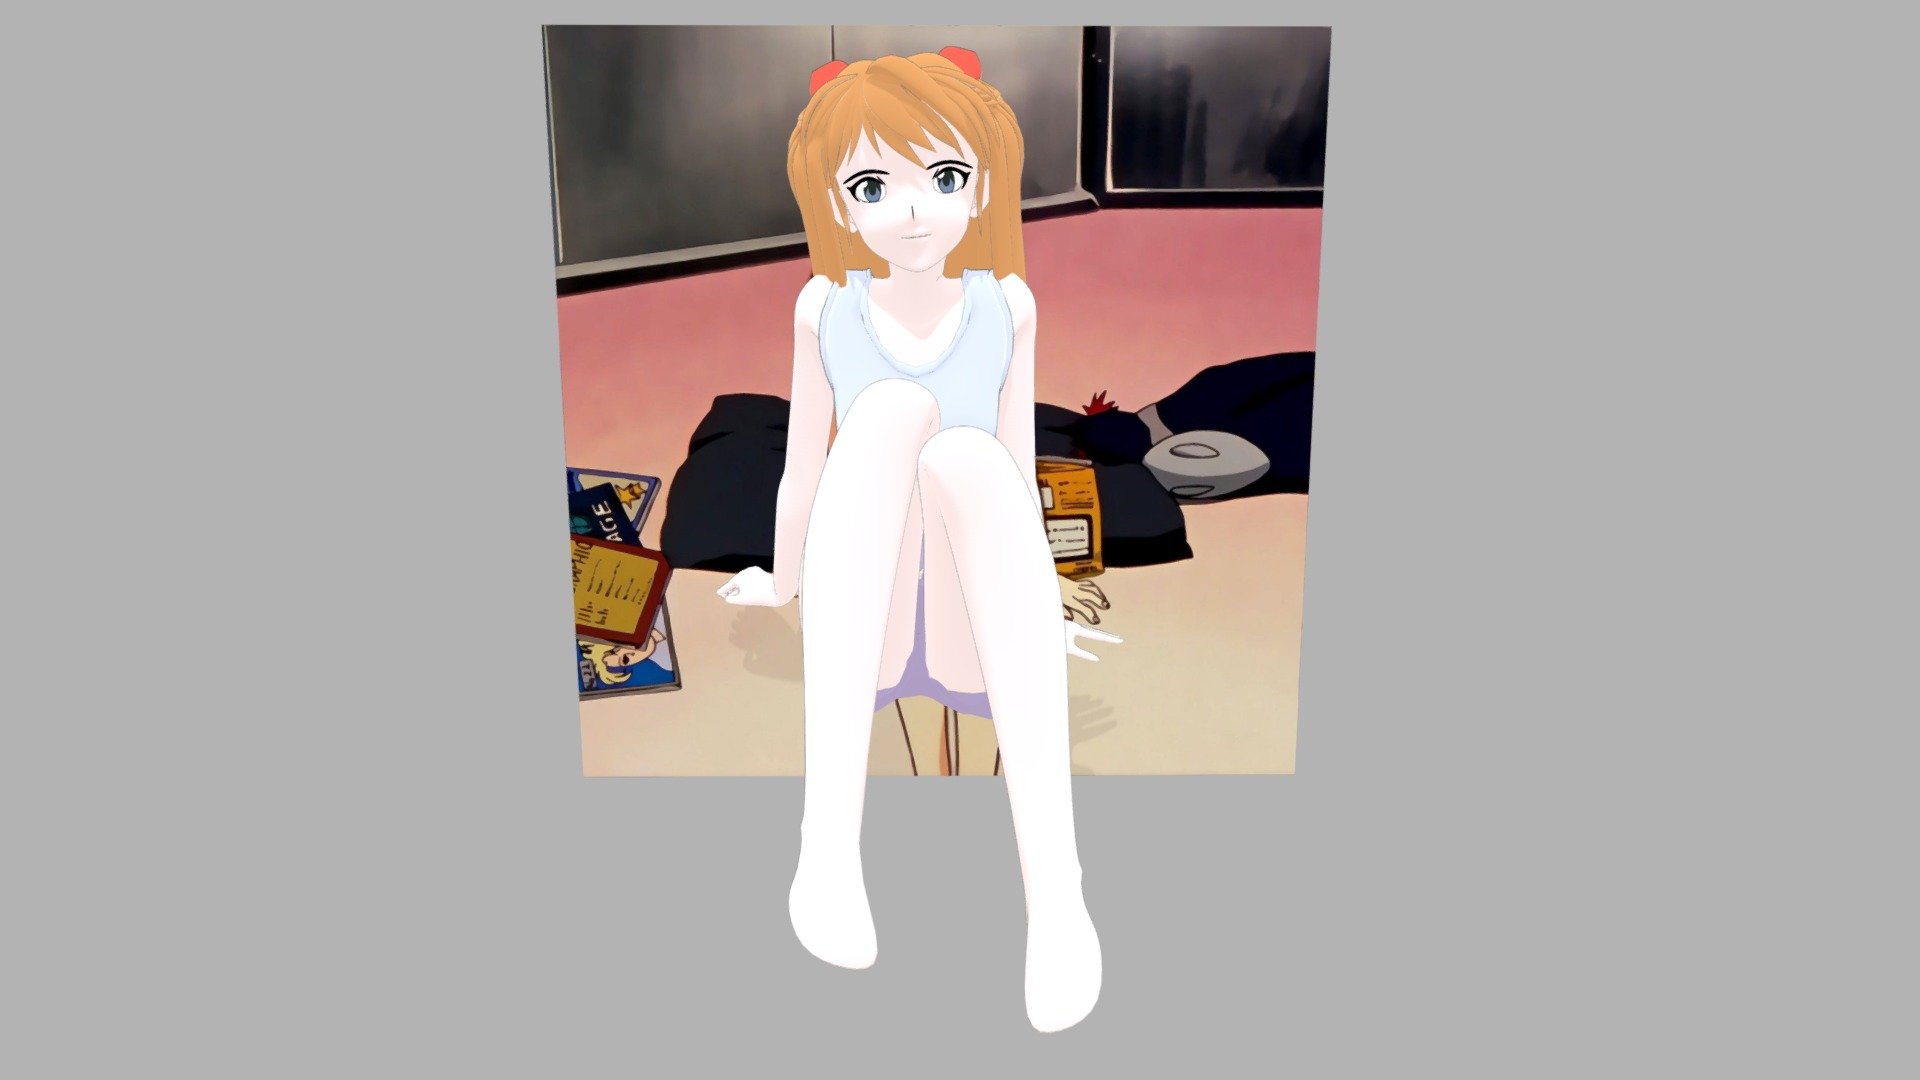 3d model of the character Asuka Langley from the anime Neon Genesis Evangelion
All materials are 100% procedural so some of them can't translate well to an image texture
Rig is good for posing but not optimal for animating
Let me know what other character you're interested in :3 - Asuka with the Sport Clothes Rigged - 3D model by de.l.uxe_kid (@deluxe_kid) 3d model